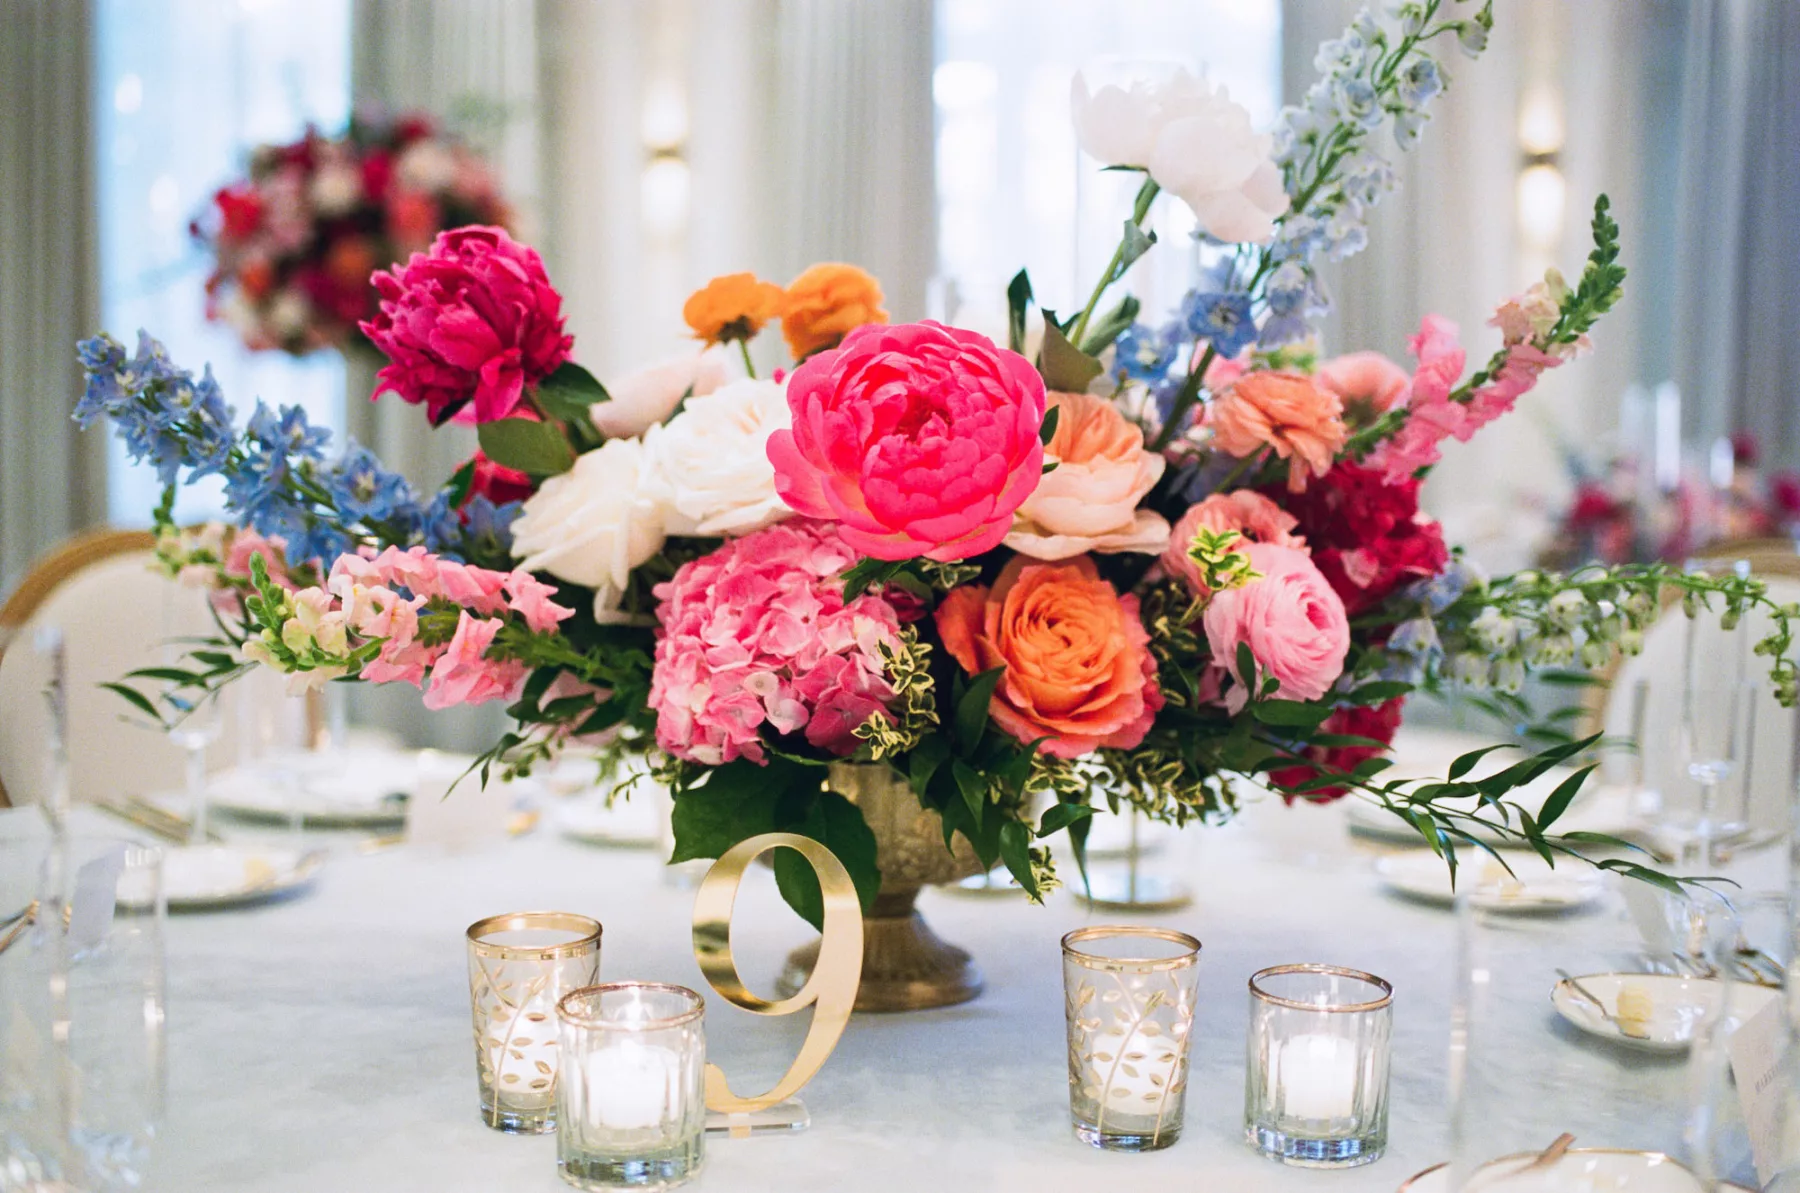 Luxurious Pink and Blue Wedding Reception Centerpiece Tablescape Decor Ideas | Pink Anemones and Hydrangeas, Orange Garden Roses, Blue Stock Flowers | Gold Acrylic Table Number Sign Inspiration | Tampa Bay Florist Bruce Wayne Florals